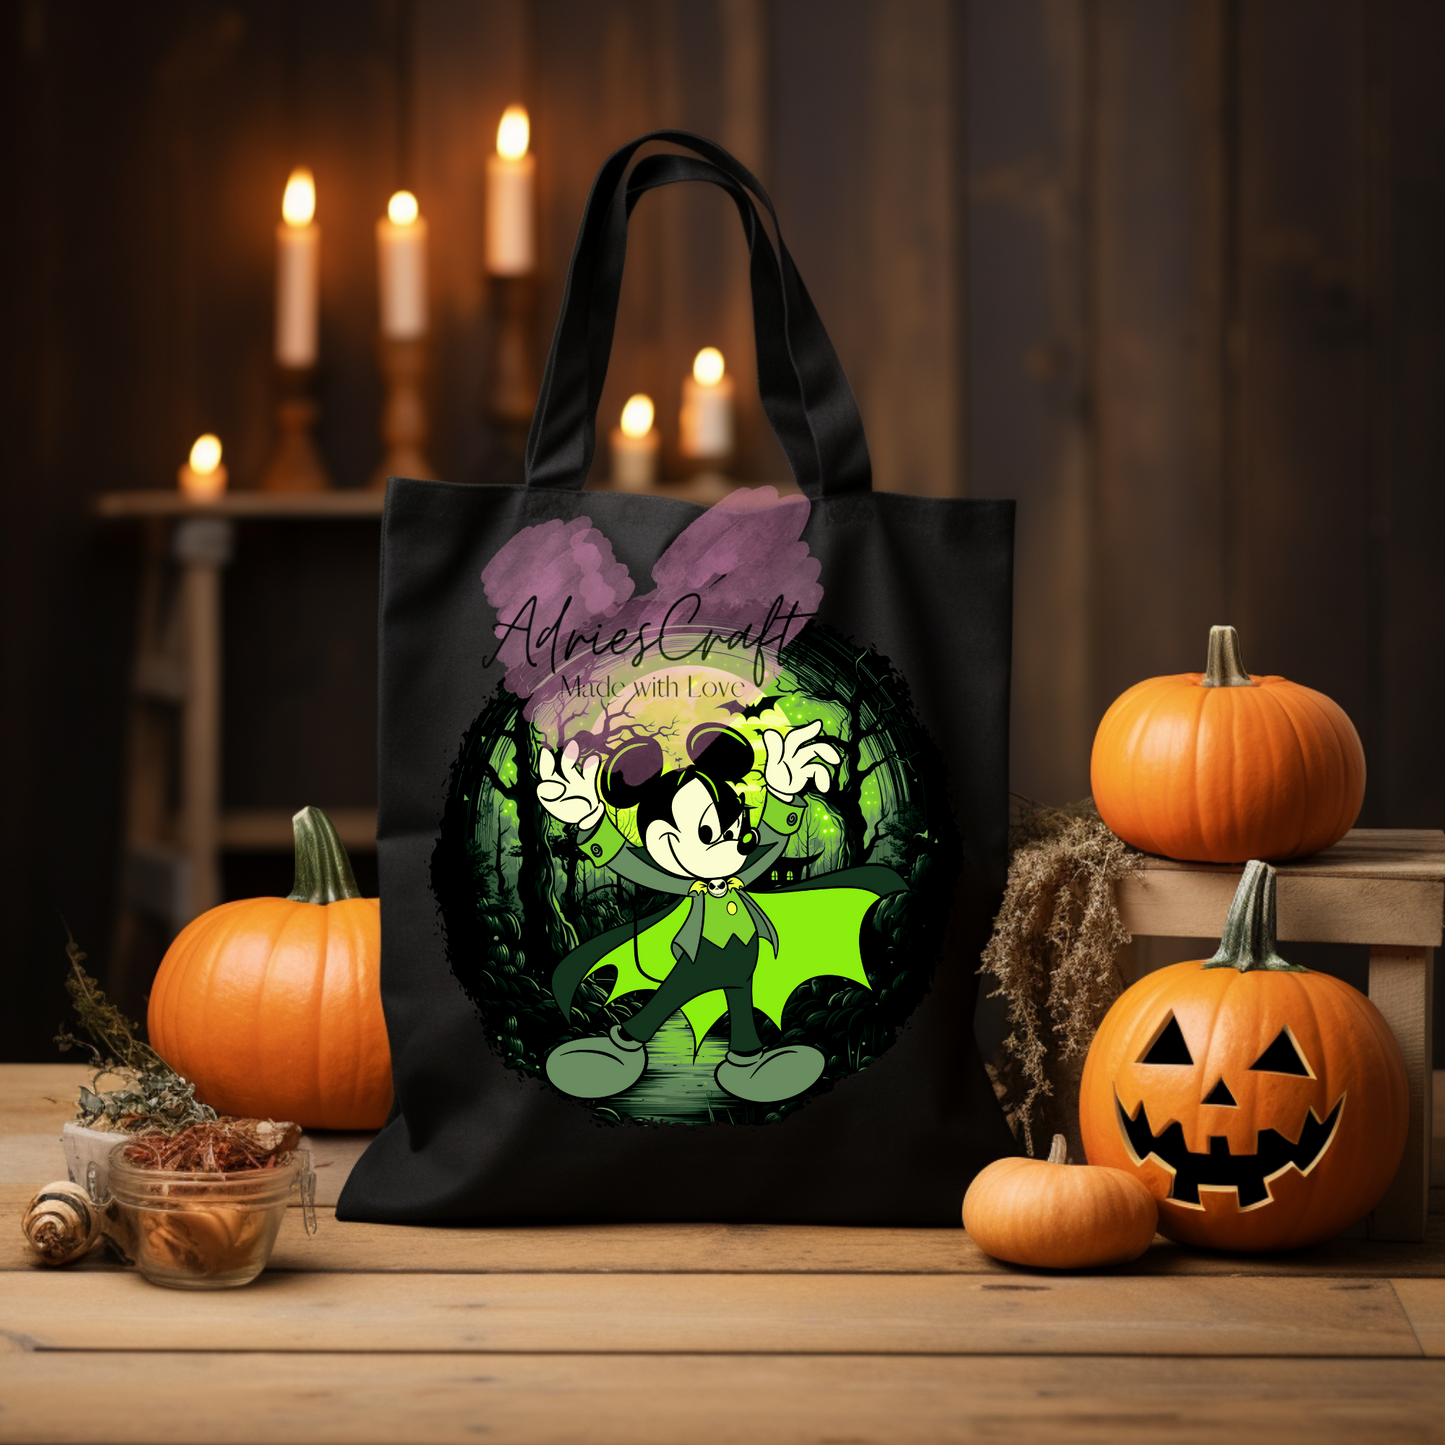 Magical Trick or Treat bags